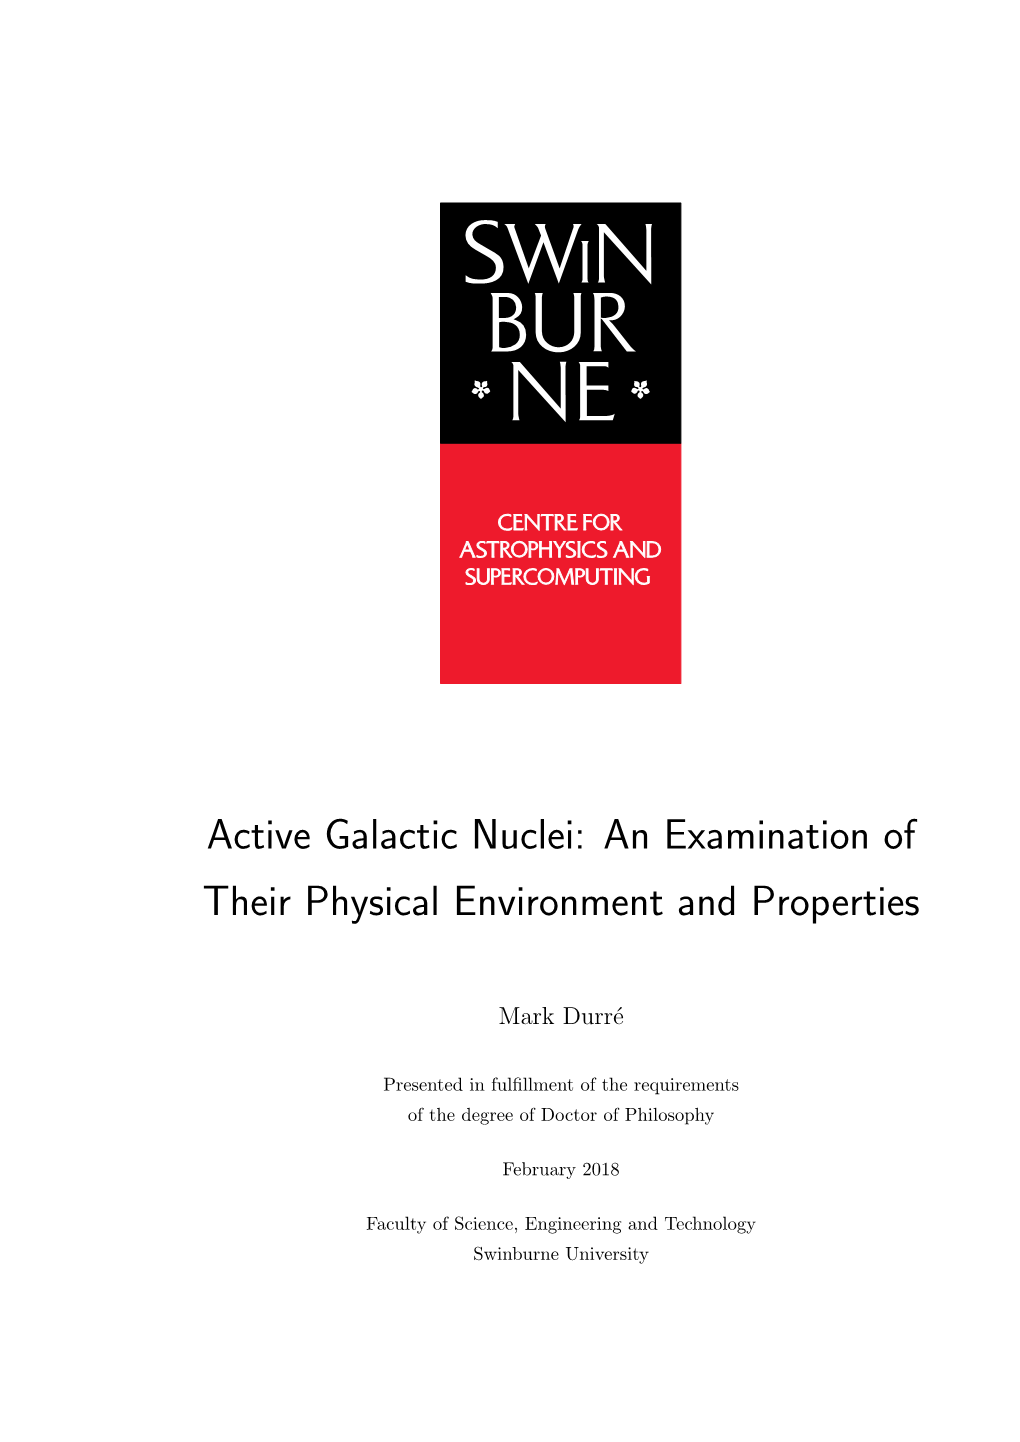 Active Galactic Nuclei: an Examination of Their Physical Environment and Properties